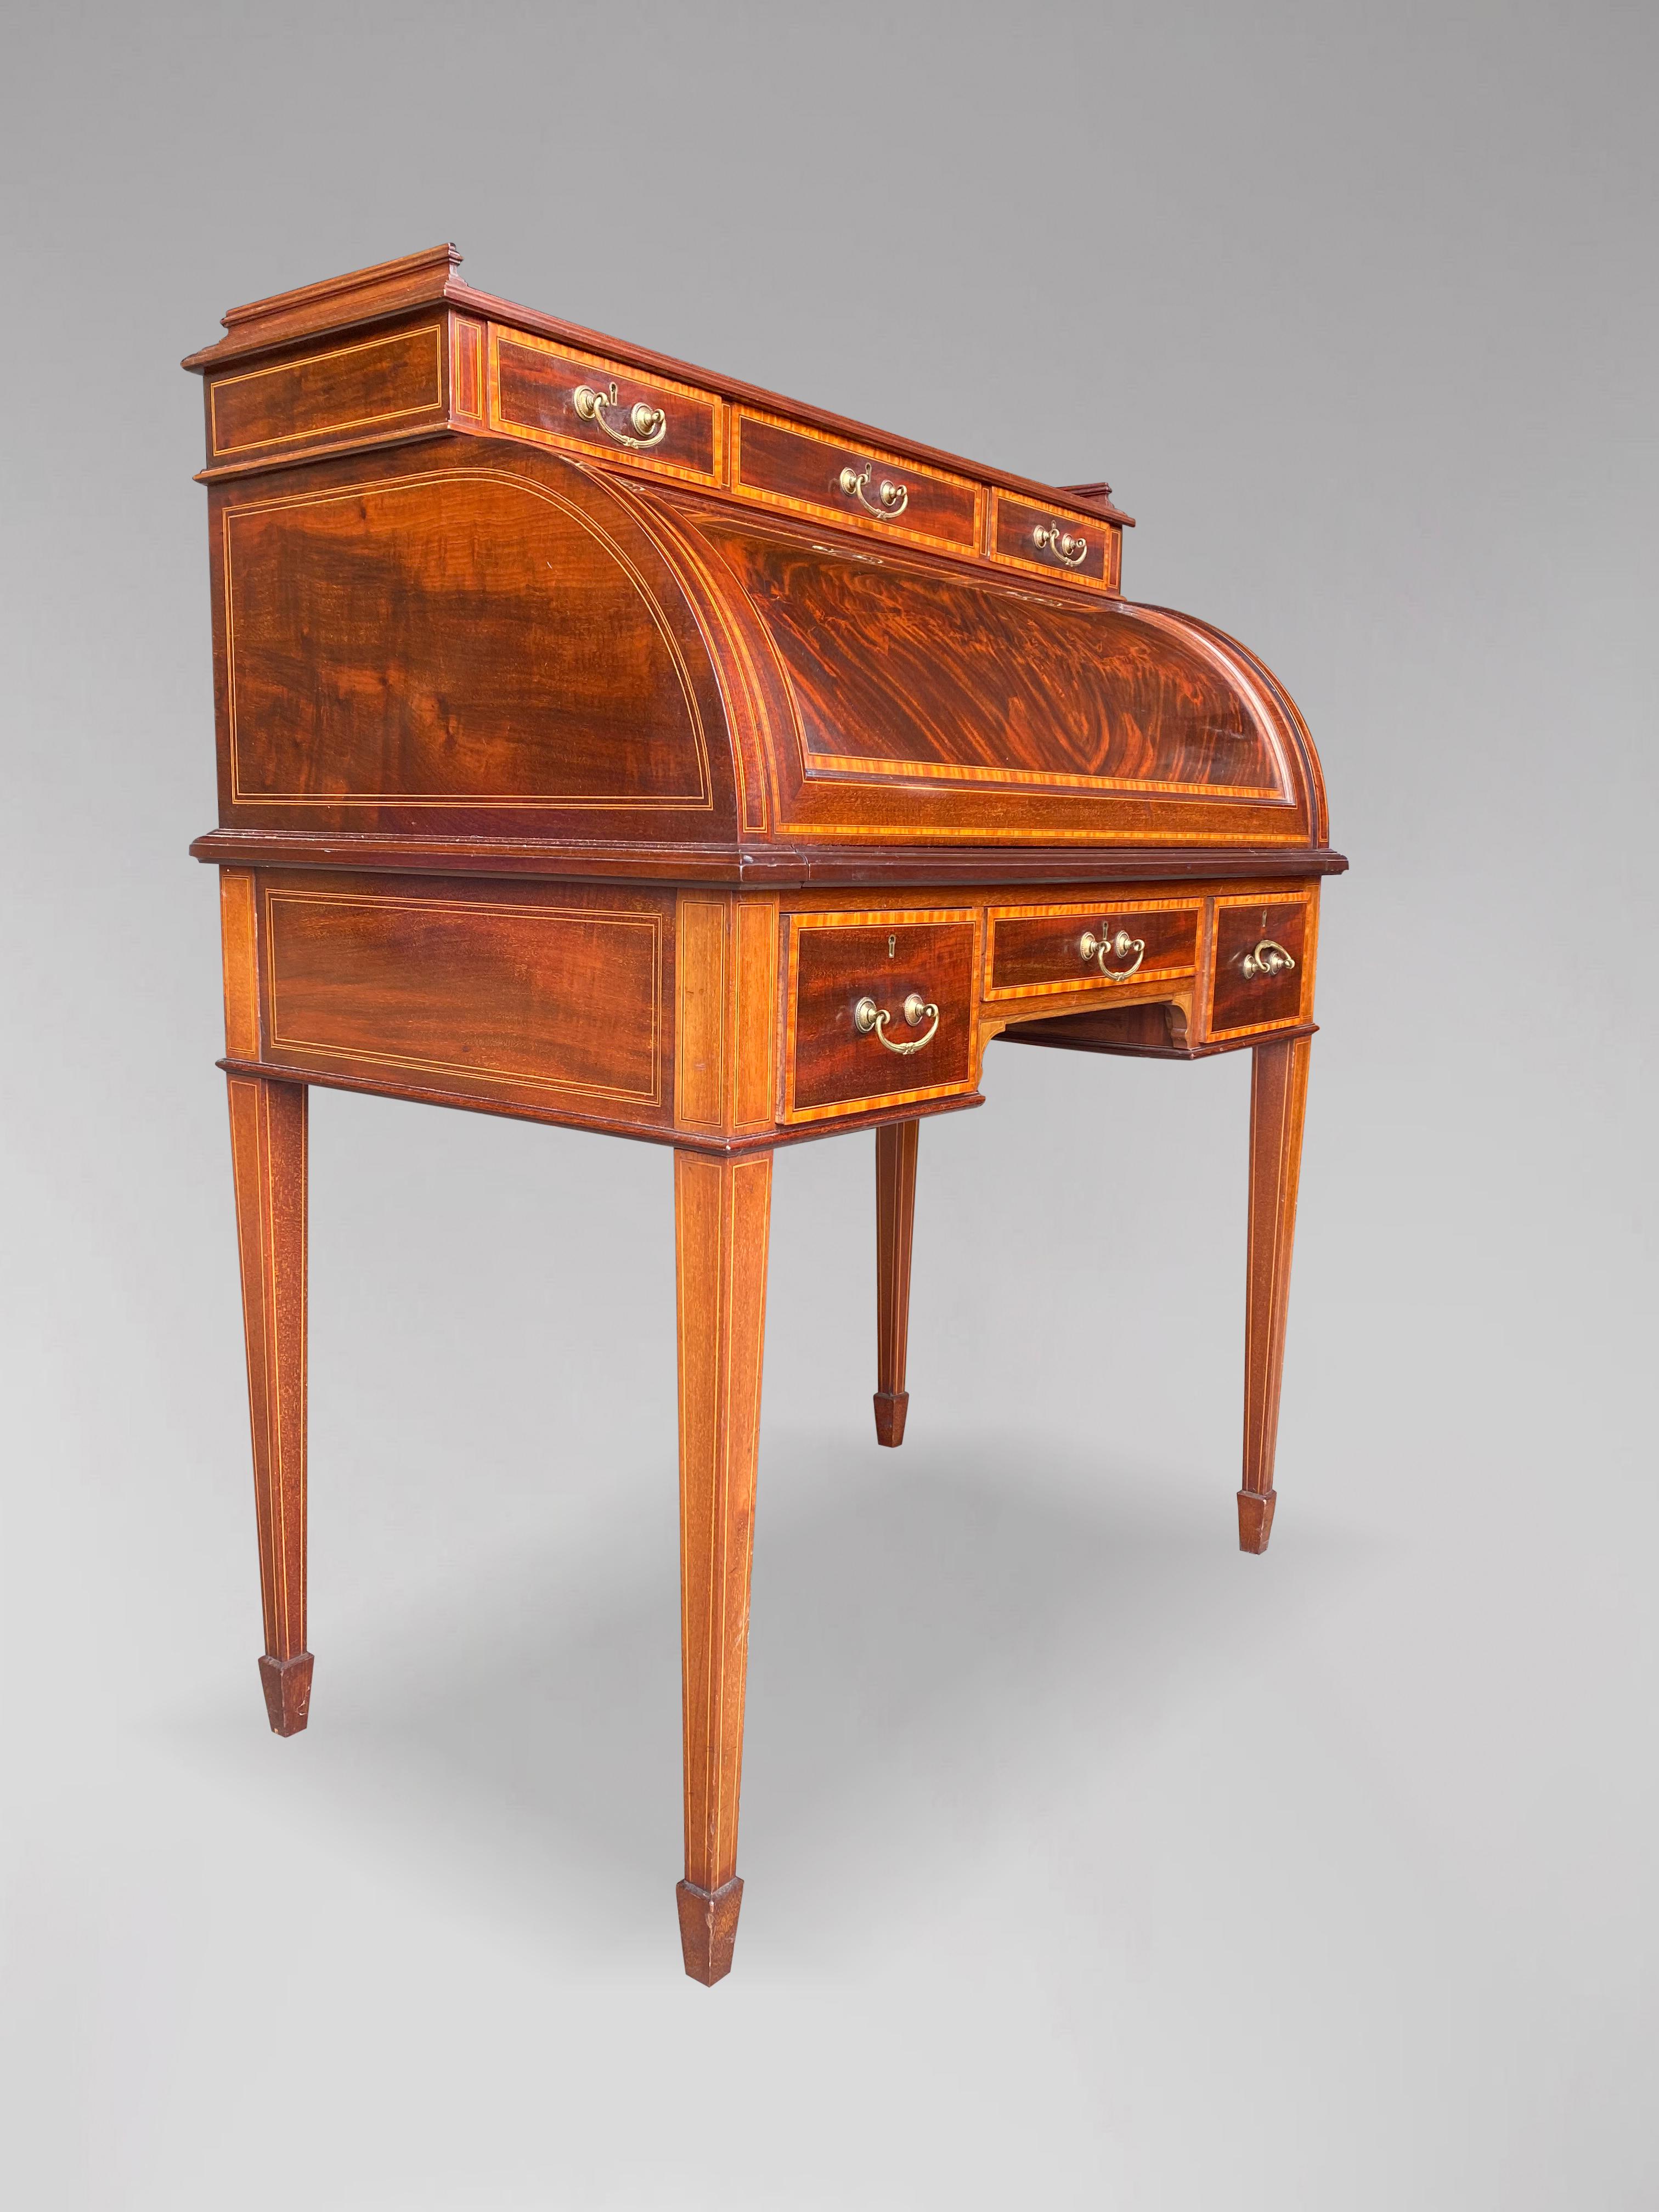 Hand-Crafted Edwardian Period Mahogany Cylinder Desk by Maple & Co